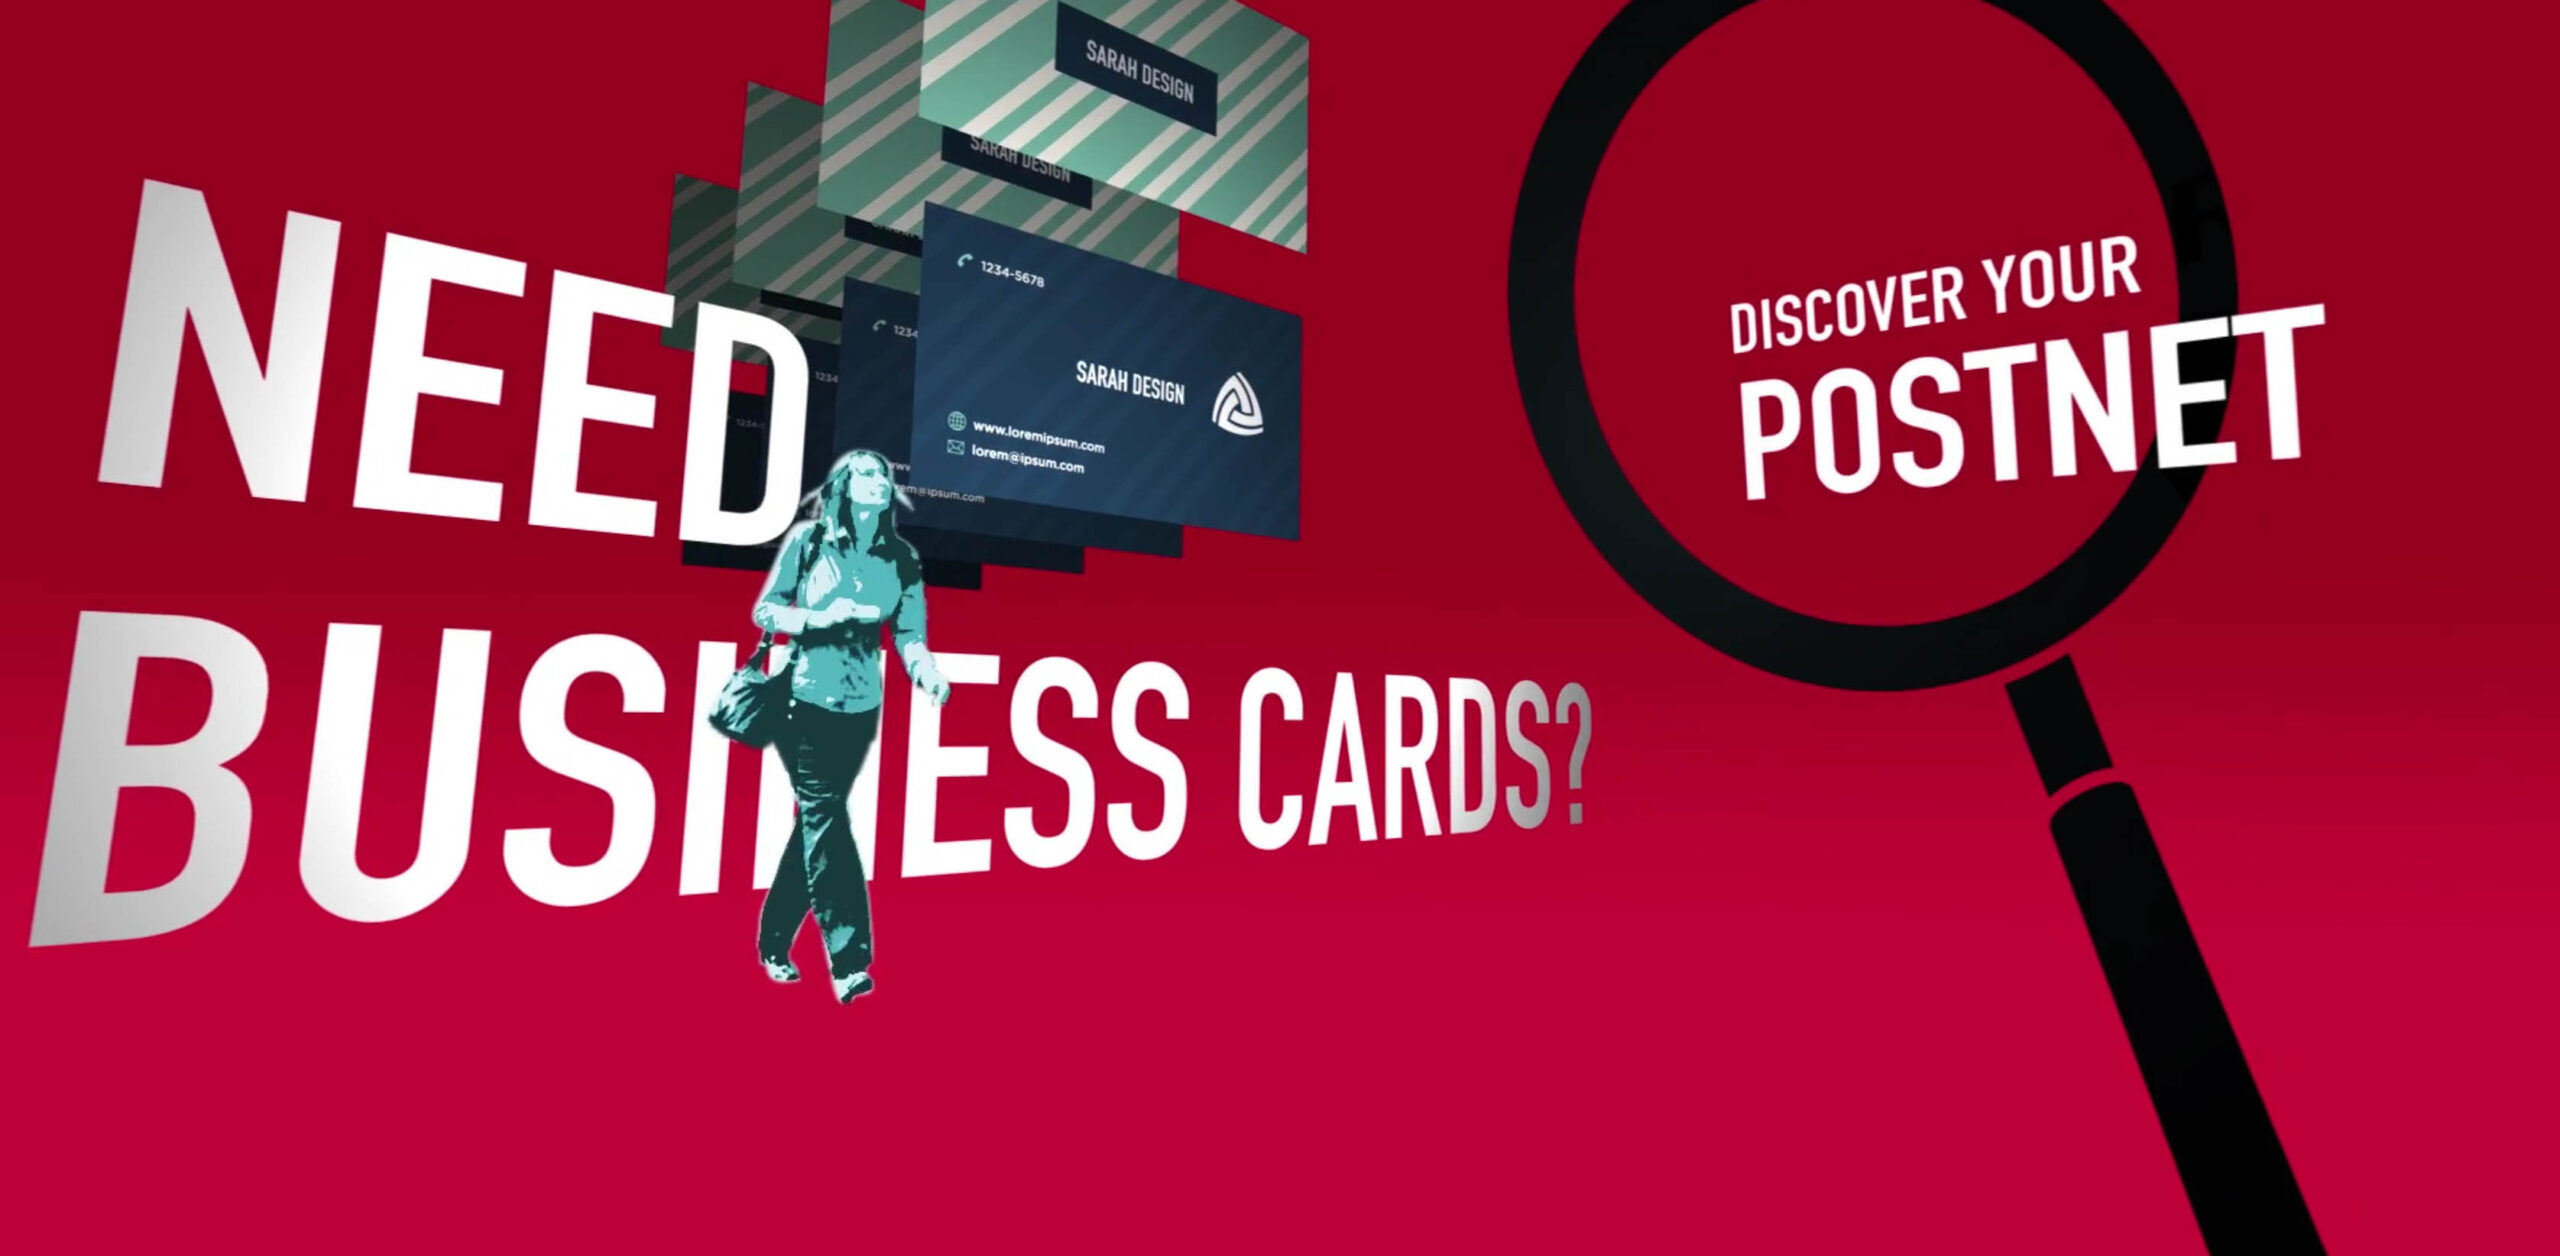 PostNet – “What We Do” Campaign